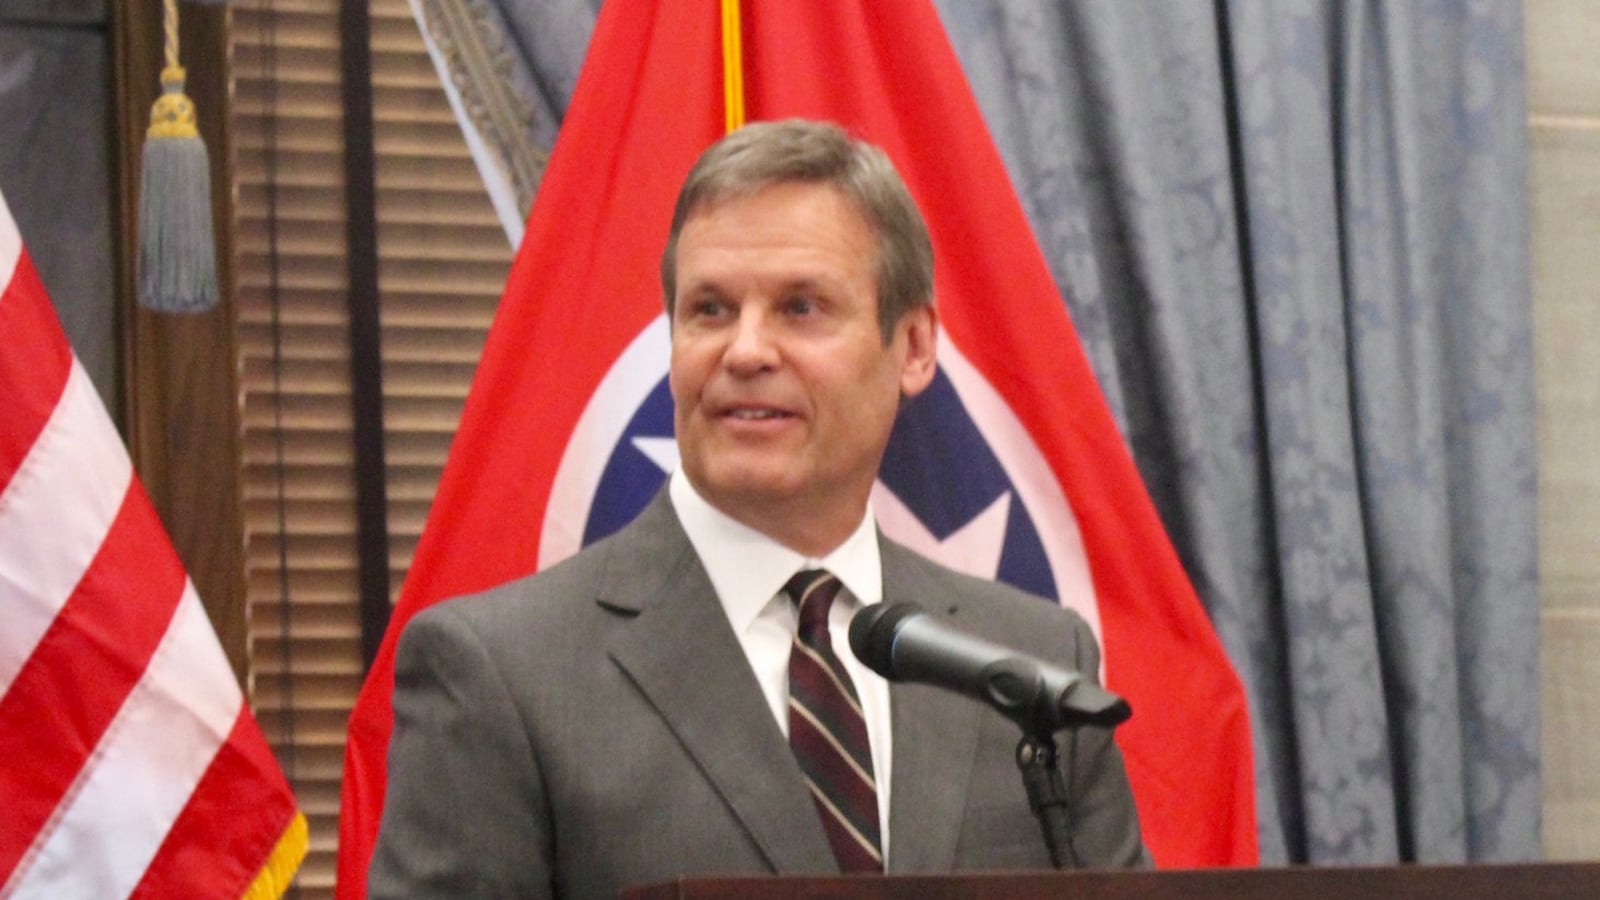 Gov.-elect Bill Lee speaks with reporters the day after being elected the 50th governor of Tennessee. His 75-day transition ends with his inauguration on Jan. 19.